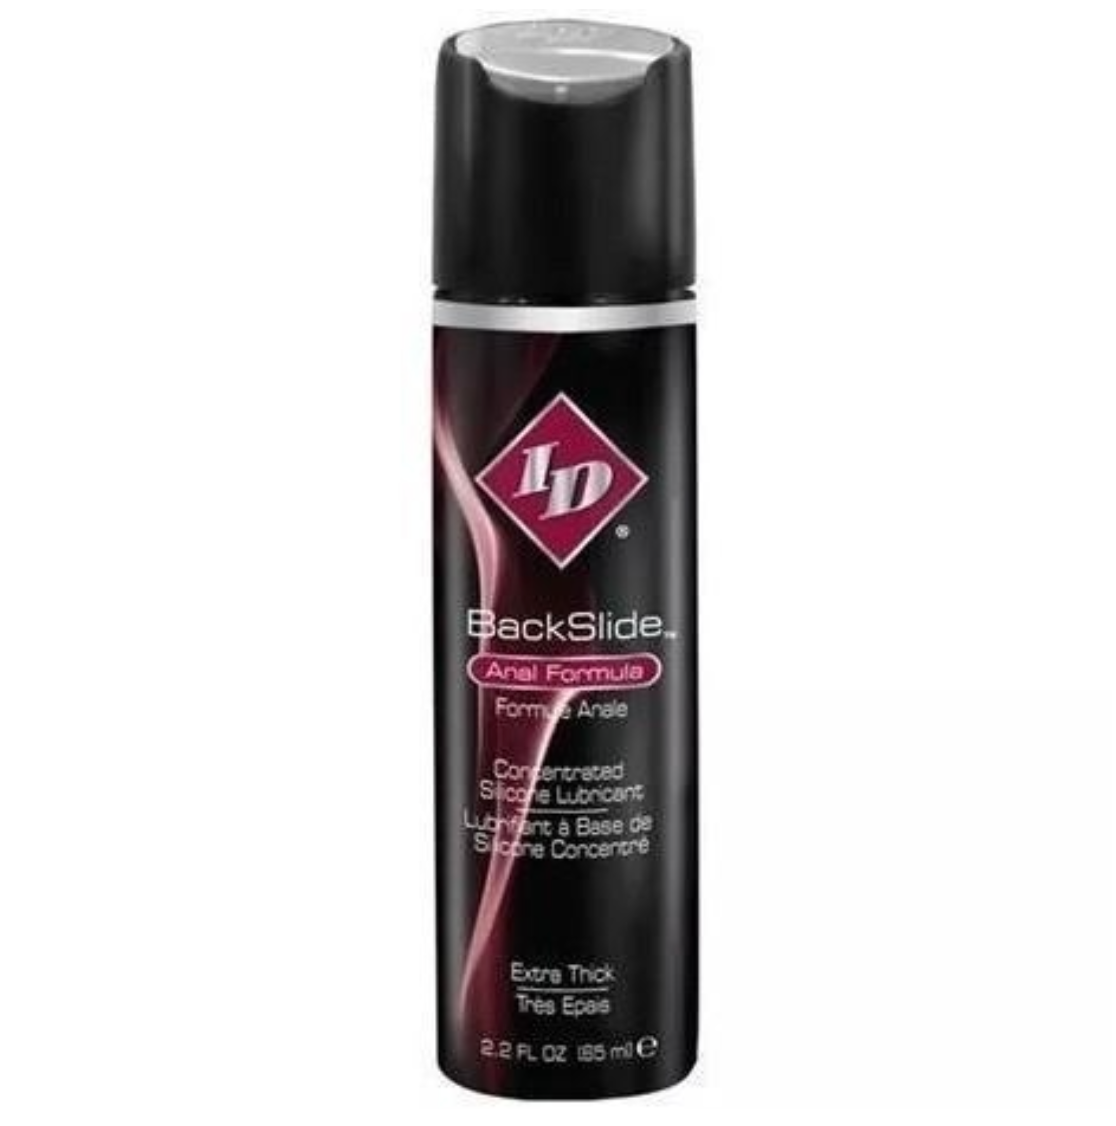 Lubricante sexual ID Backslide Anal Lubricant 2.2 oz Cake Sex Shop Juguetes Sexuales para Adultos